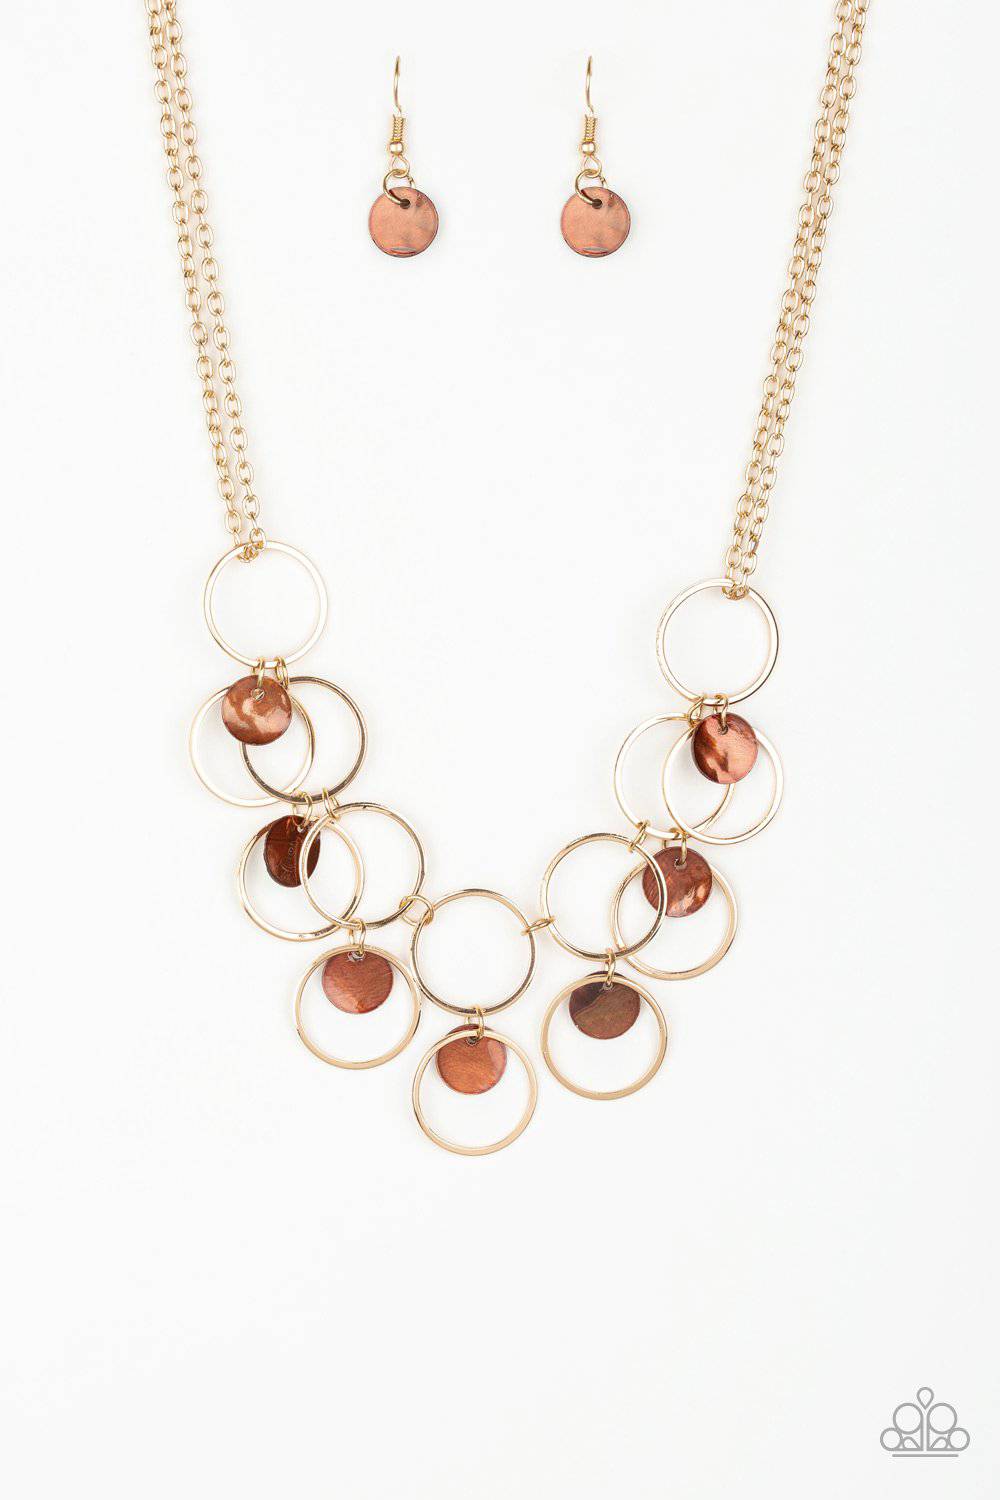 Ask and You SHELL Receive - Brown Necklace - Paparazzi Accessories - GlaMarous Titi Jewels